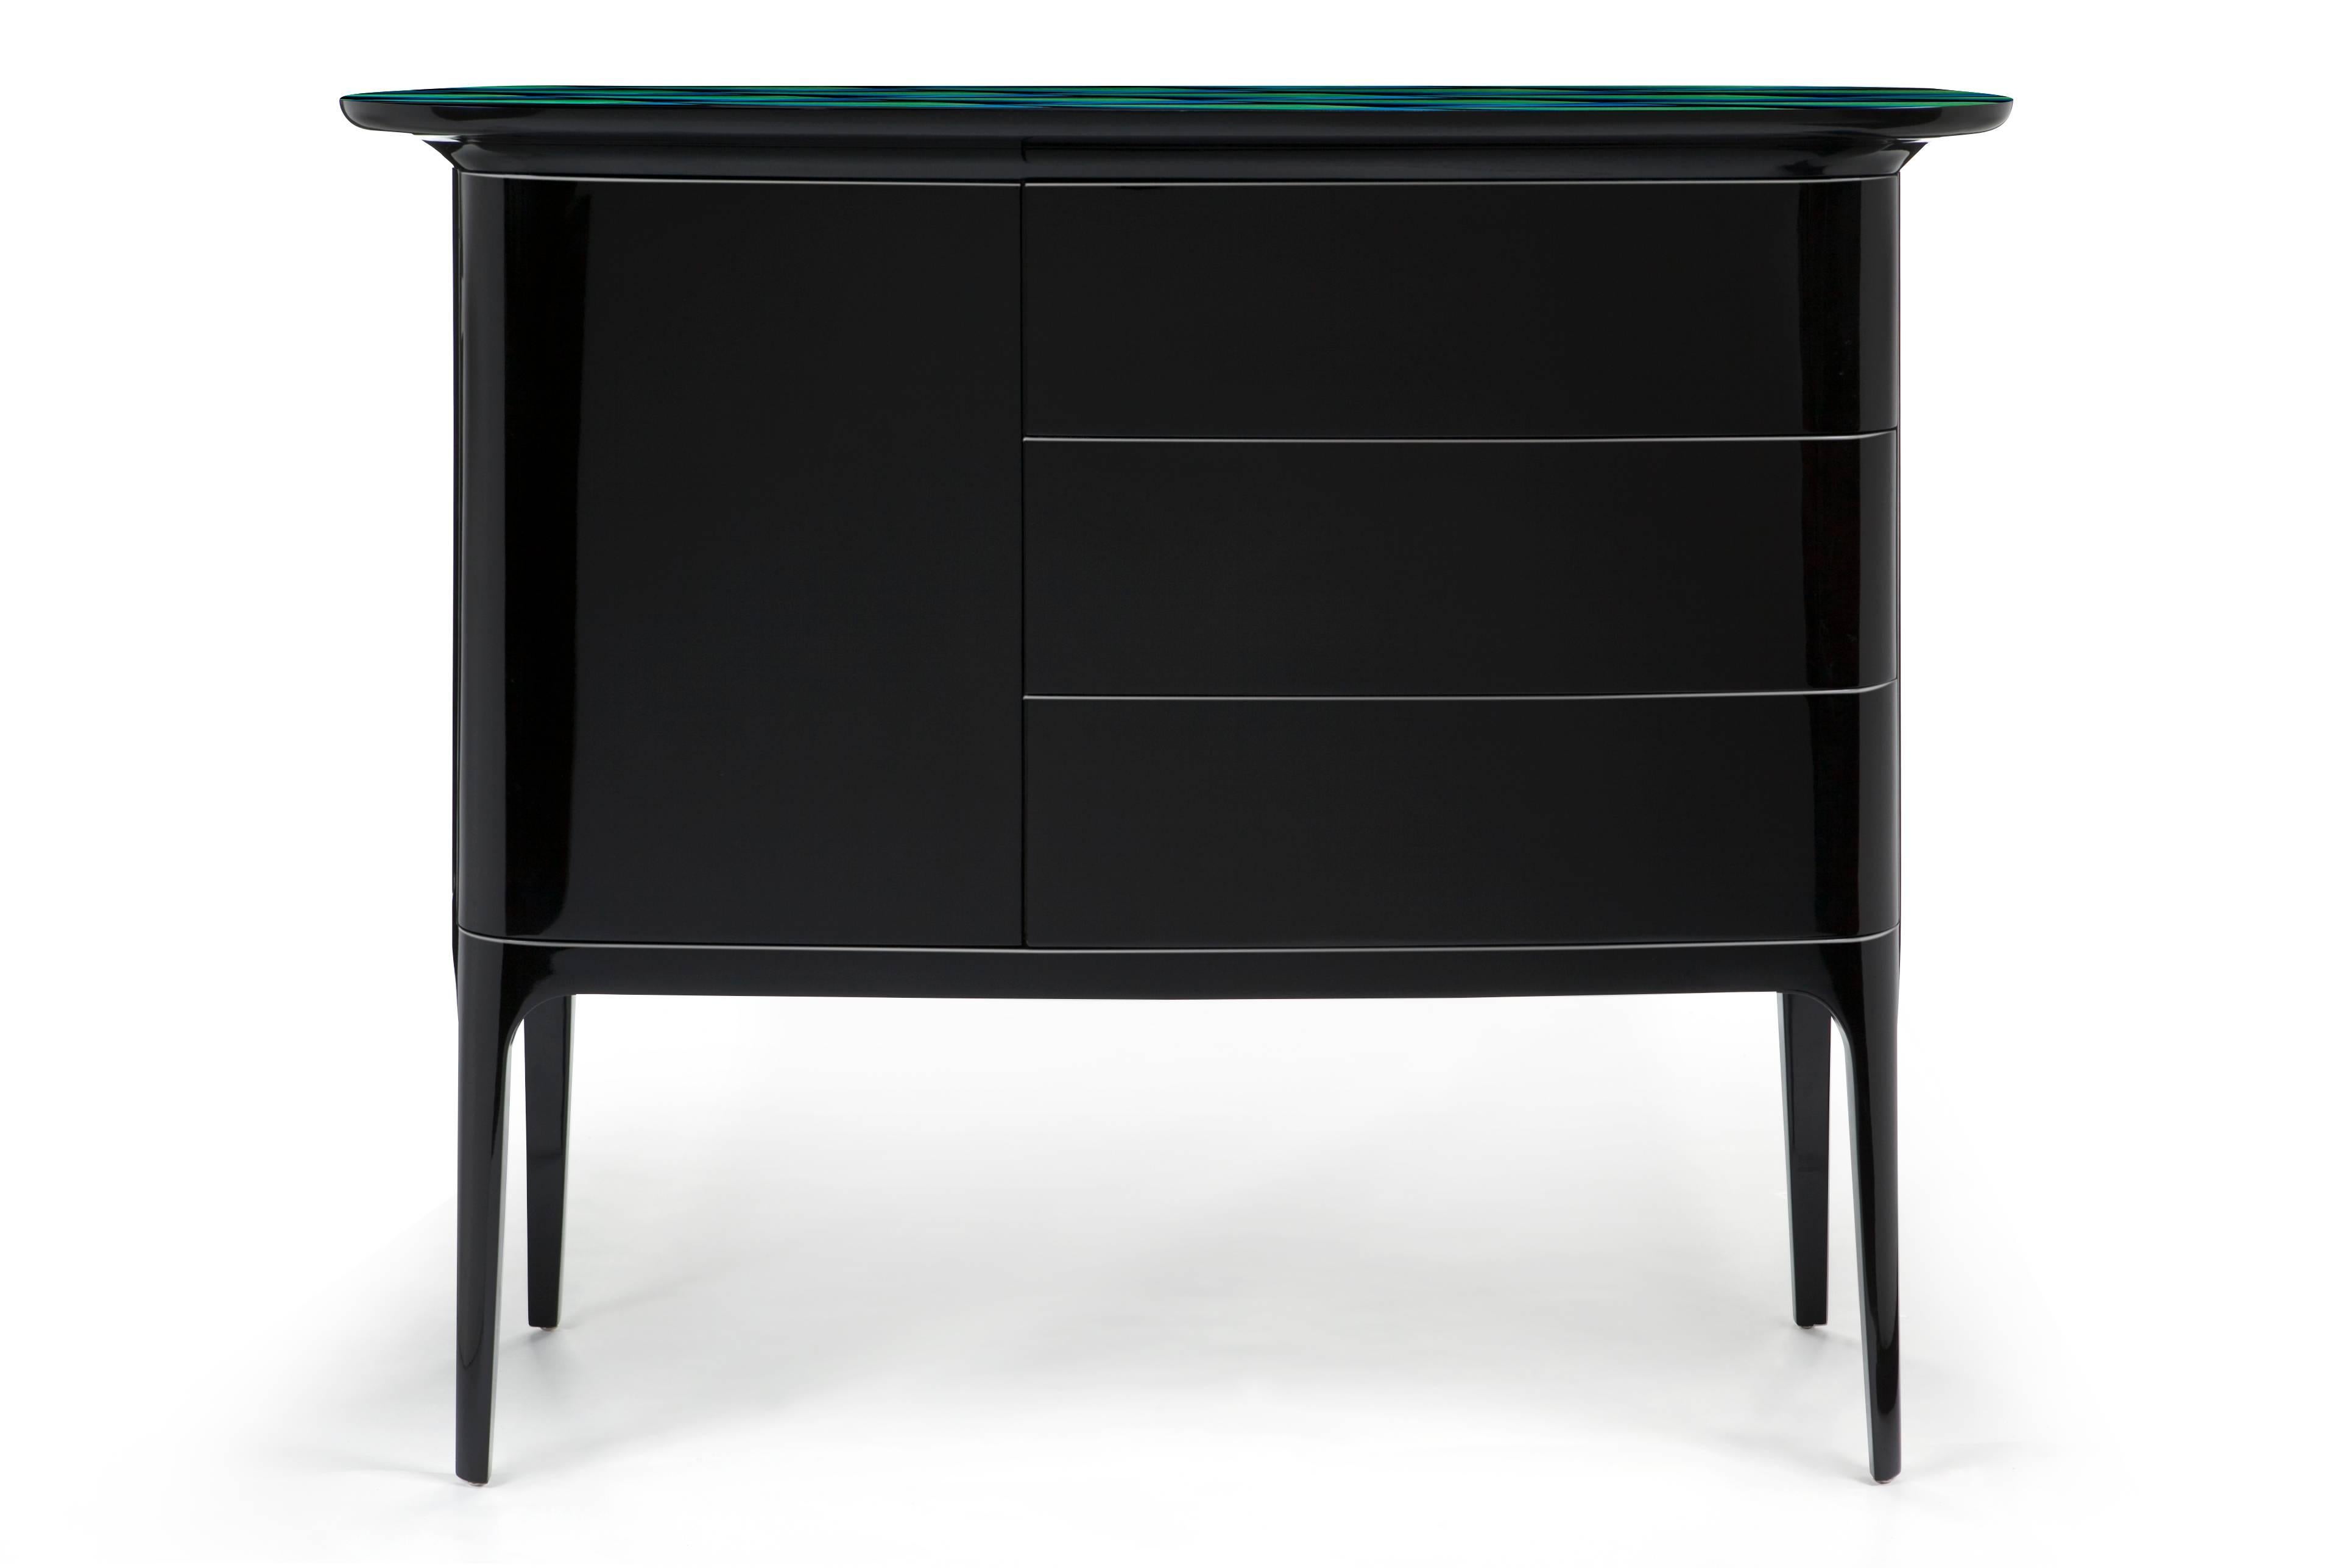 Designed by French Studio Jean-Marc Gady and manufactured by Art cabinet-maker Craman-Lagarde for Fort Royal, Shitake furniture collection elegantly combines black lacquered wood with straw marquetry. 
Shitake is the perfect balance between a